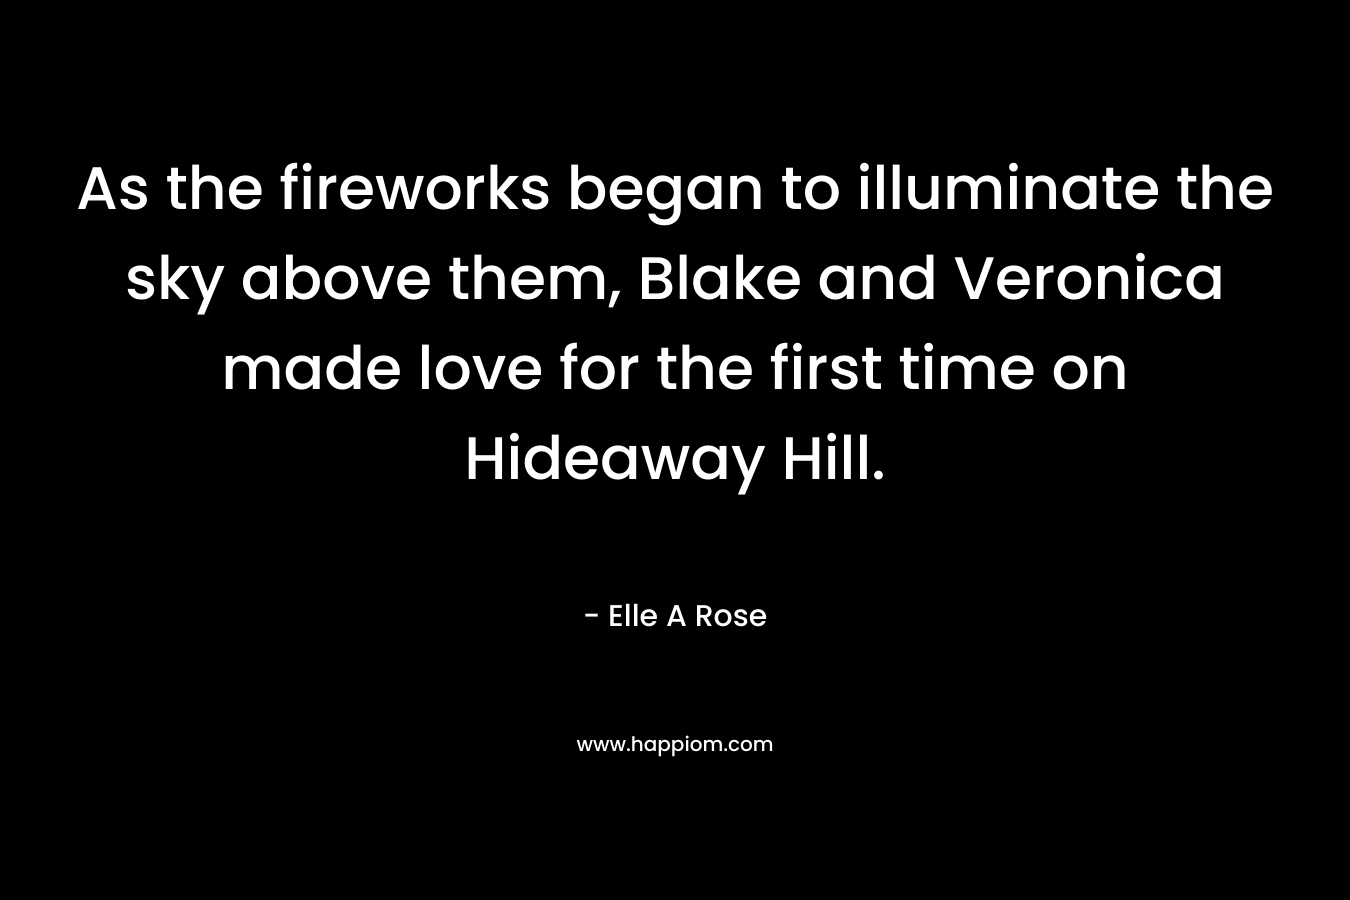 As the fireworks began to illuminate the sky above them, Blake and Veronica made love for the first time on Hideaway Hill. – Elle A Rose